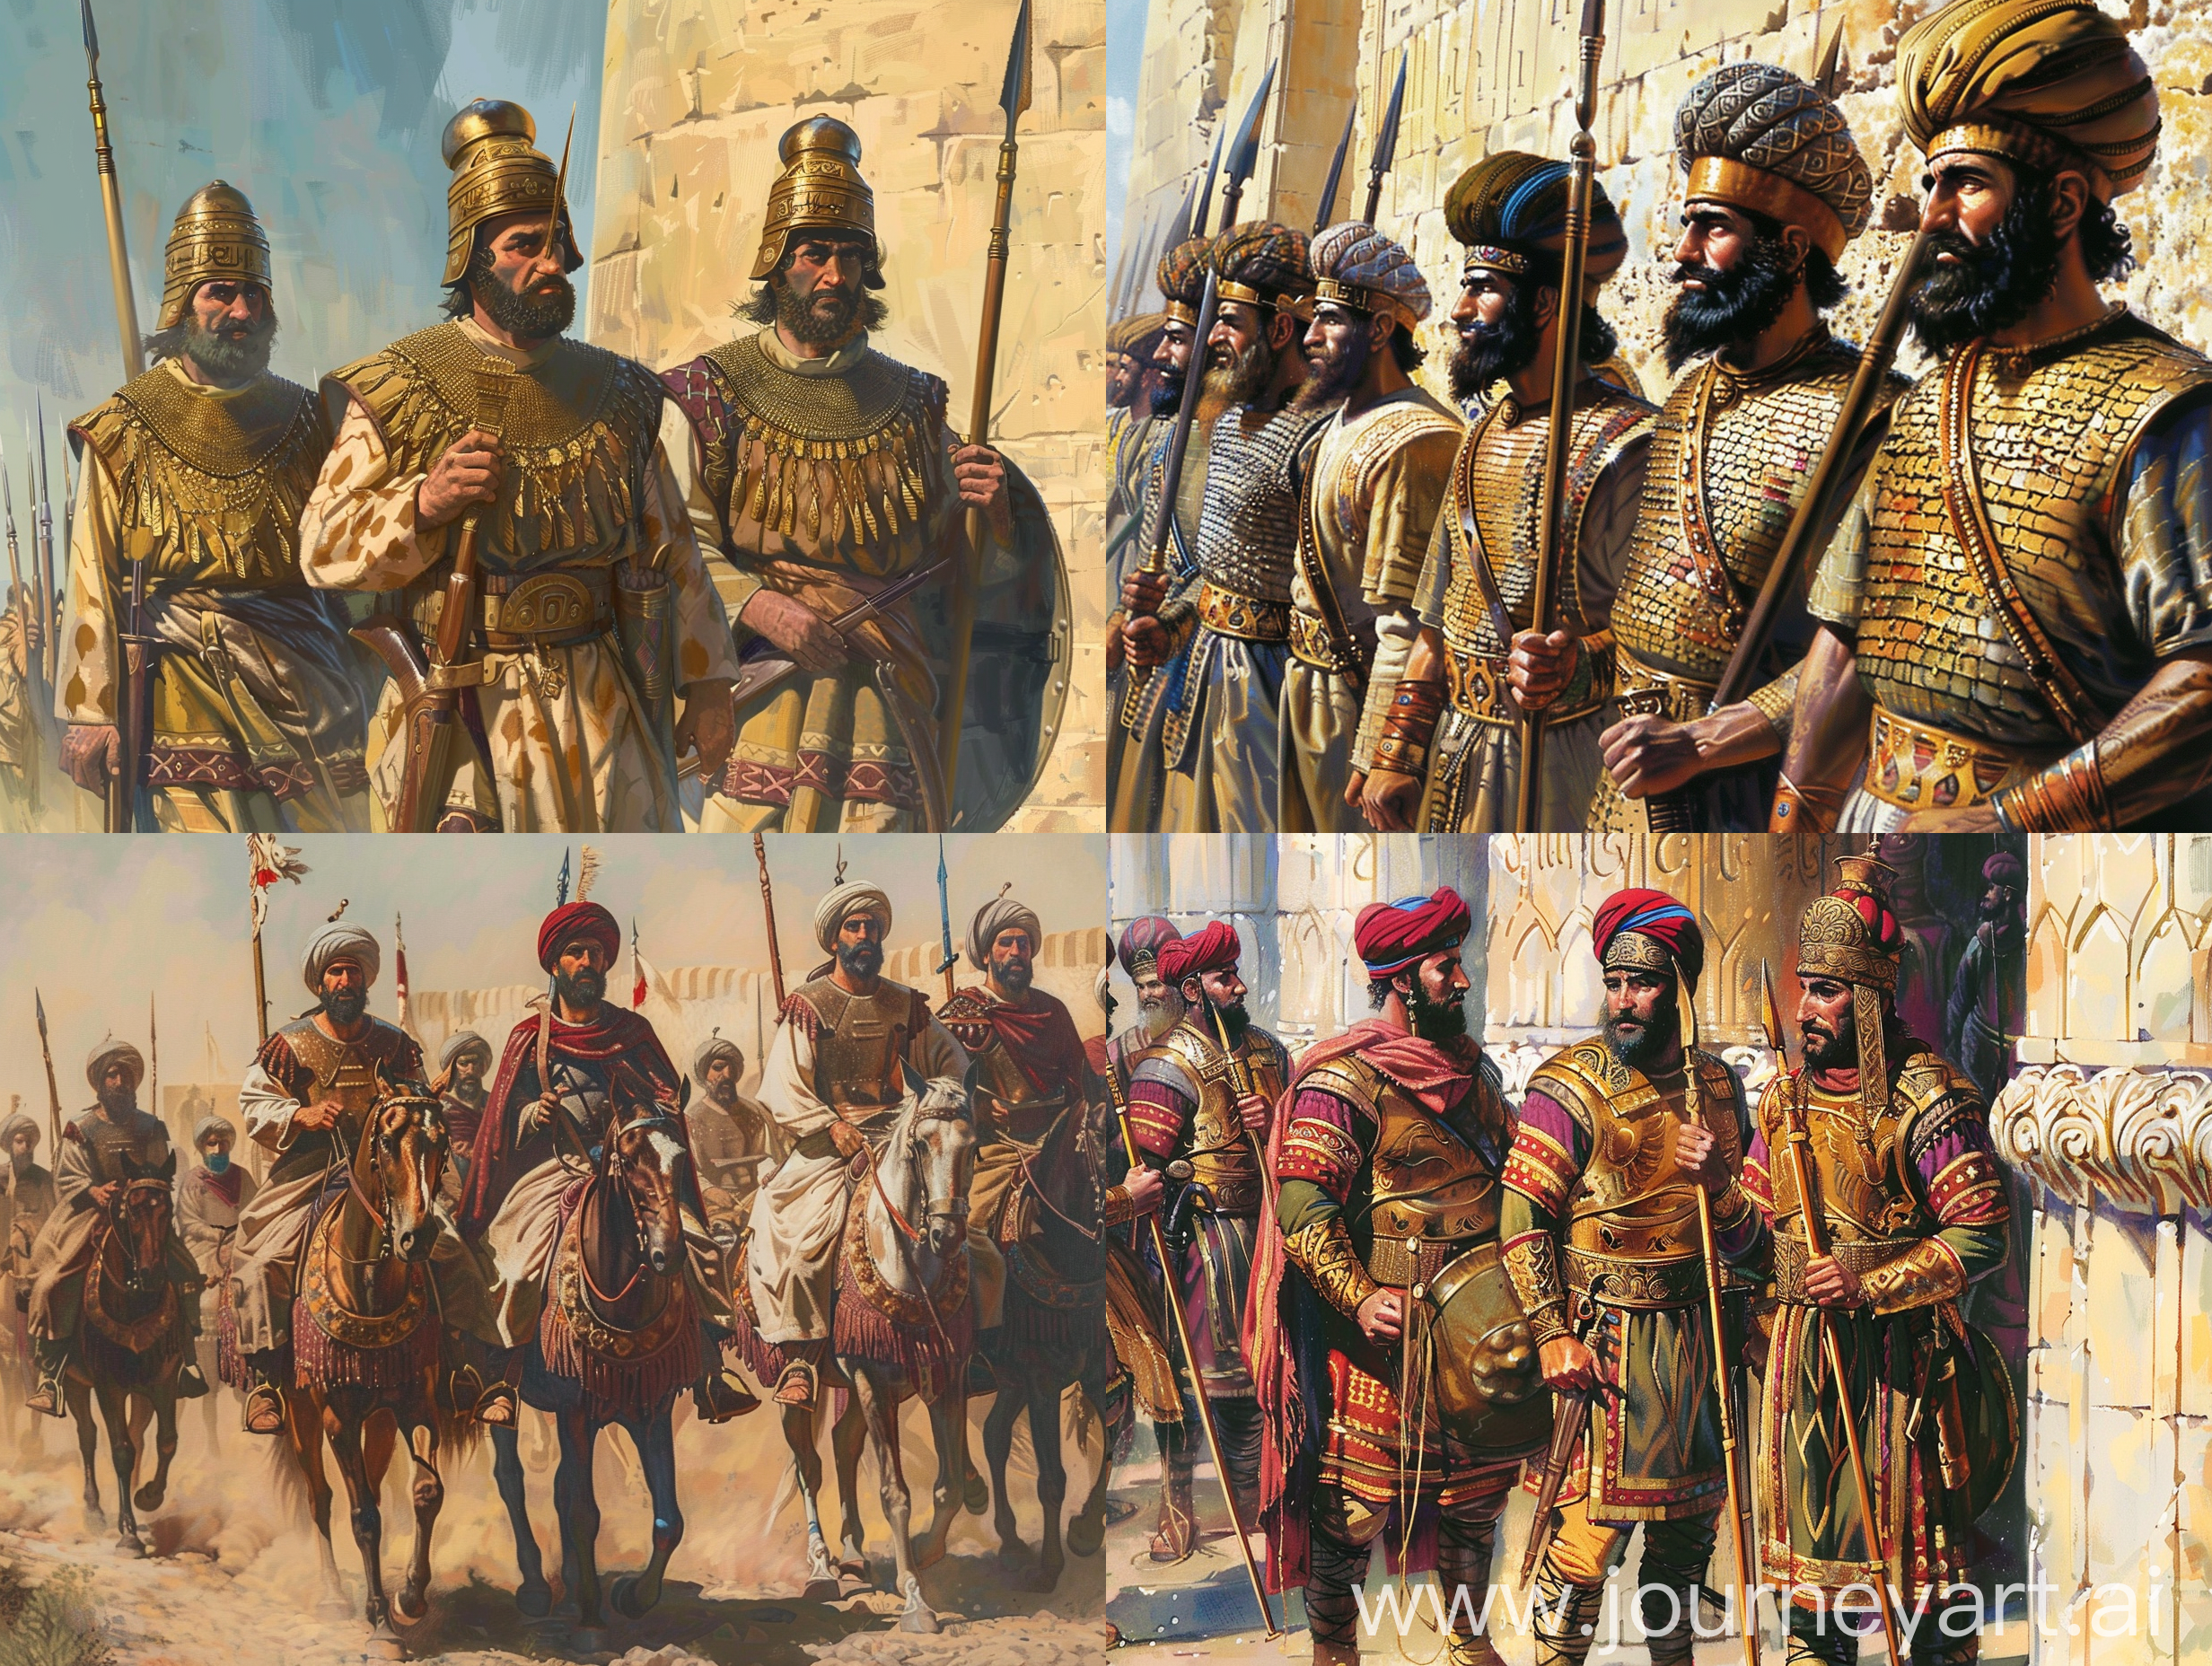 Sassanian soldiers of Iran